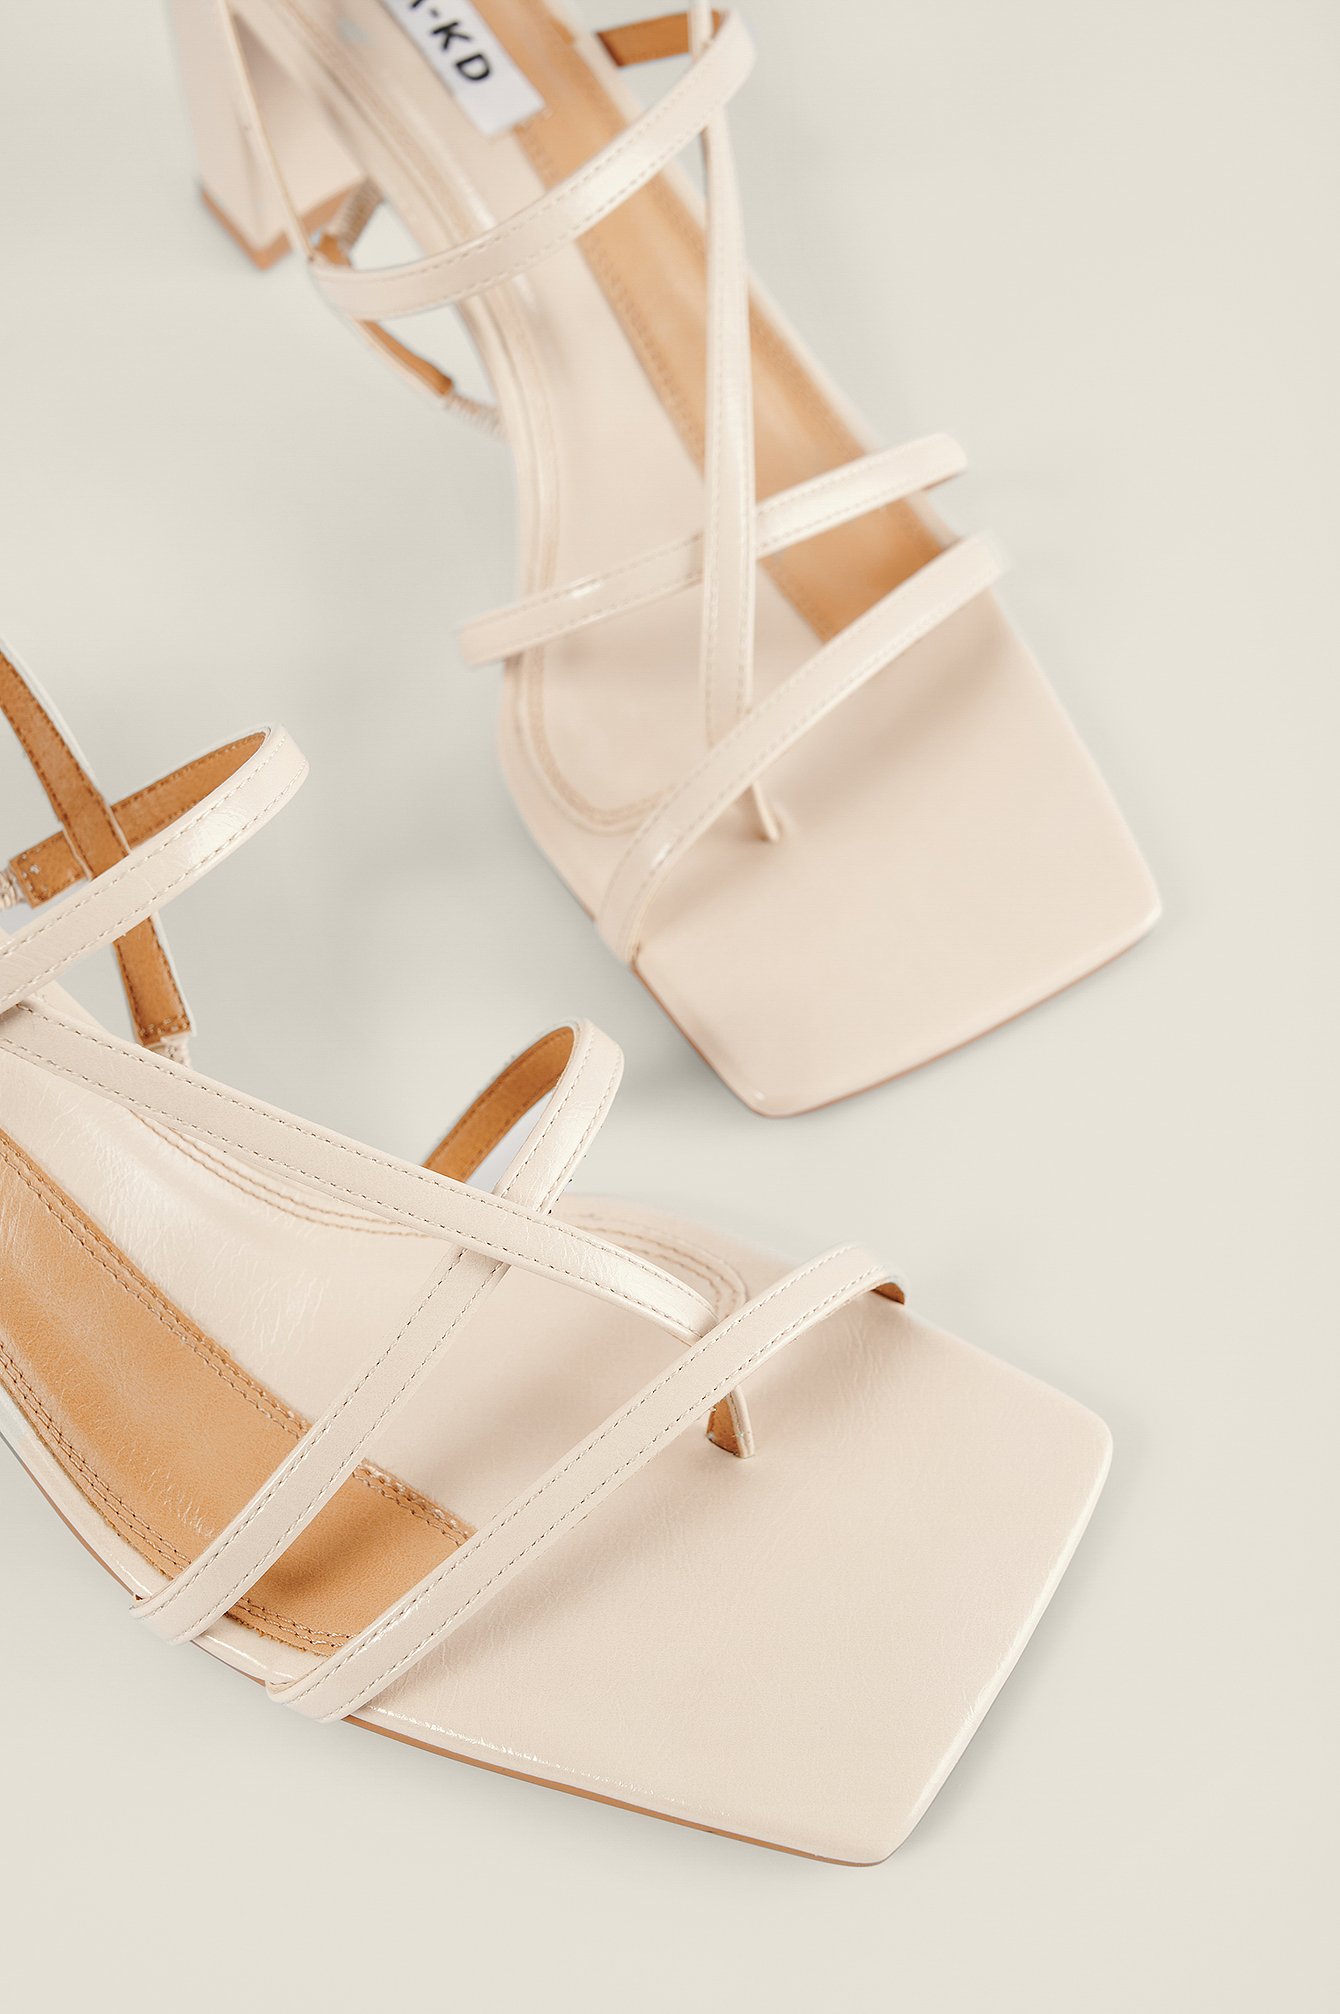 Offwhite Strappy Block Heels